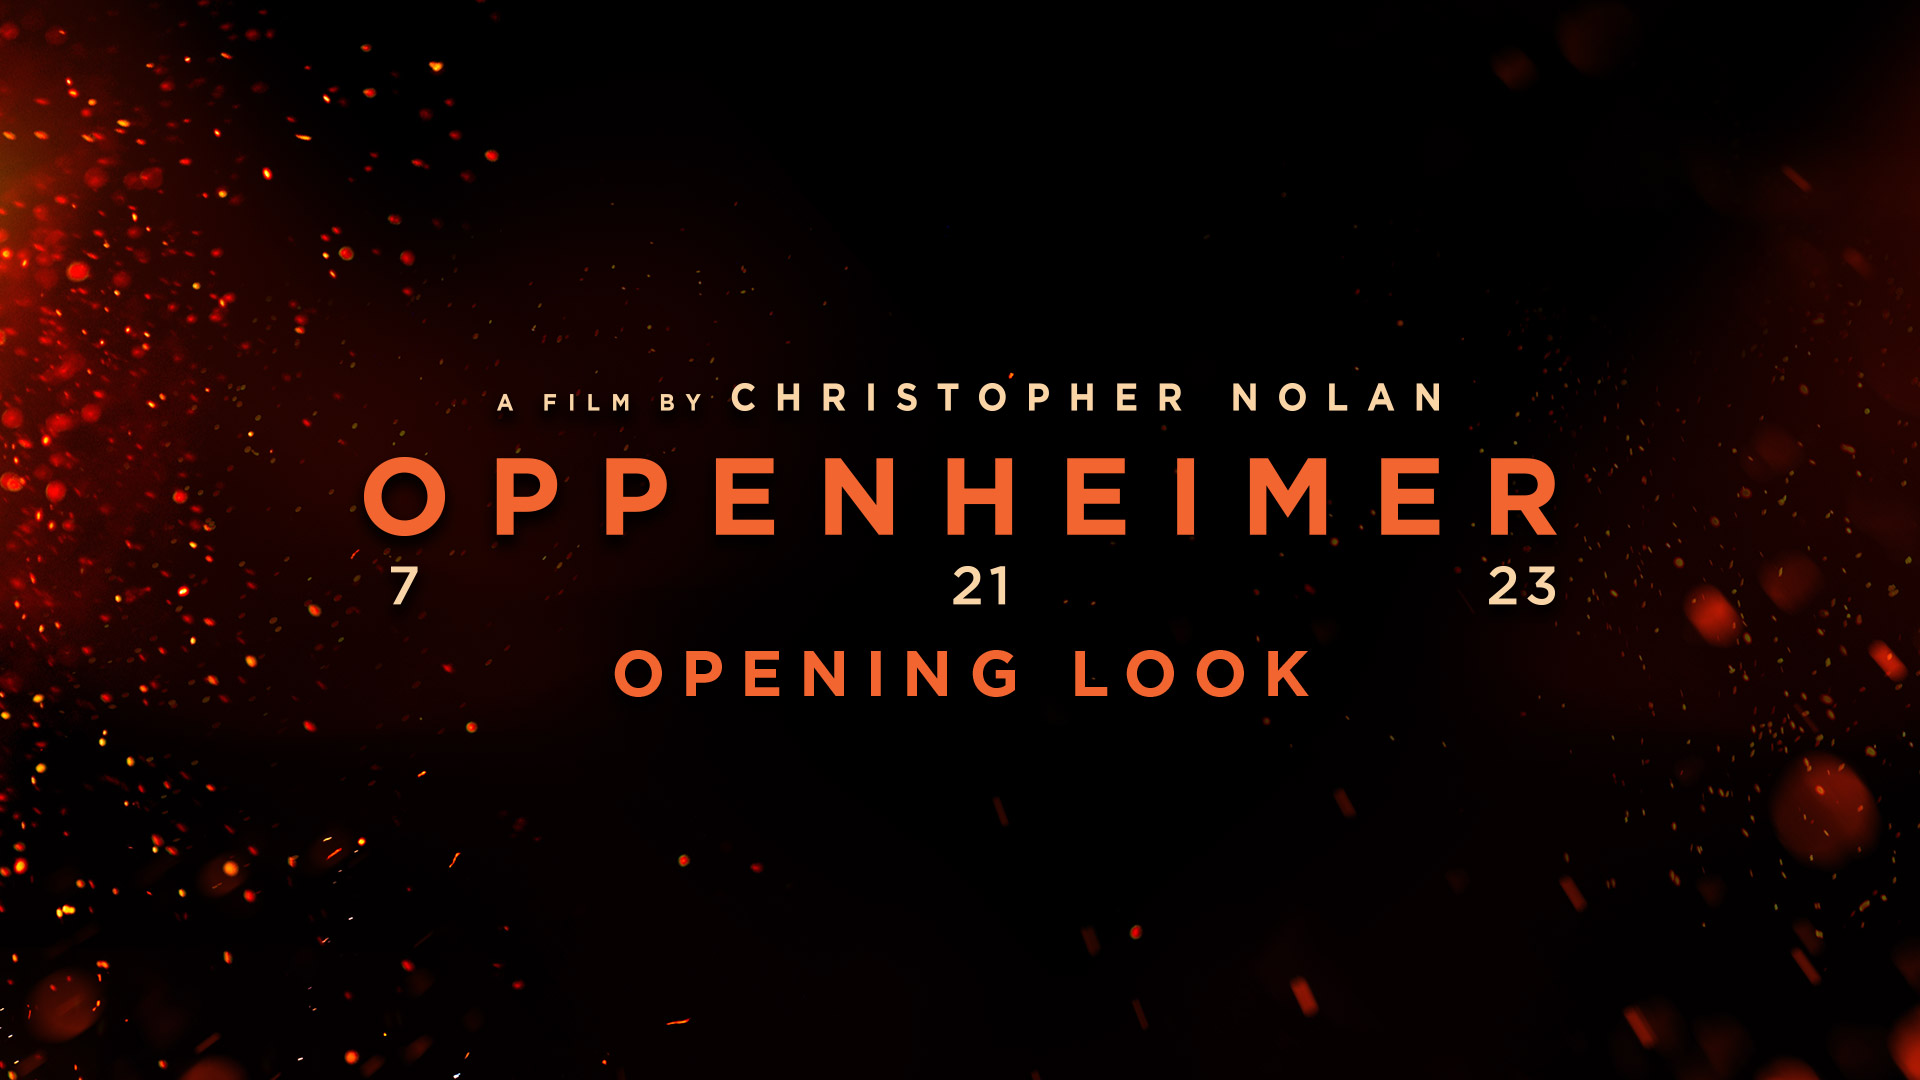 OPPENHEIMER 5-Minute Opening Look at Christopher Nolan's Film